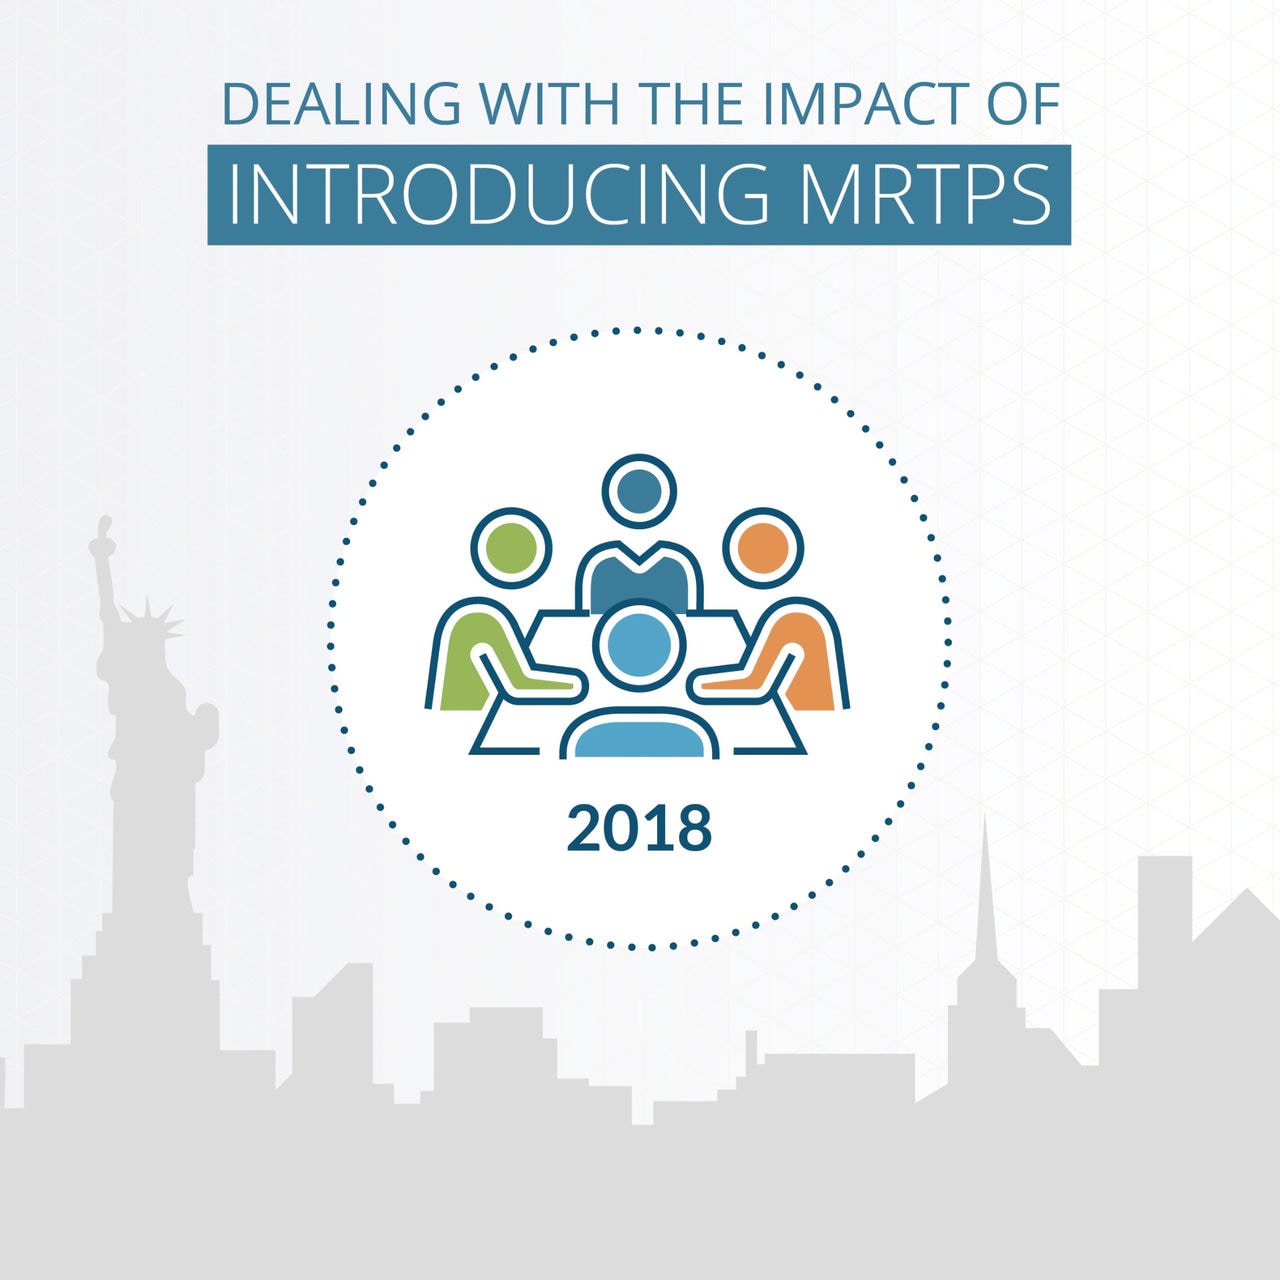 Infographic of handling the impact of MRPS 2018's implementation.